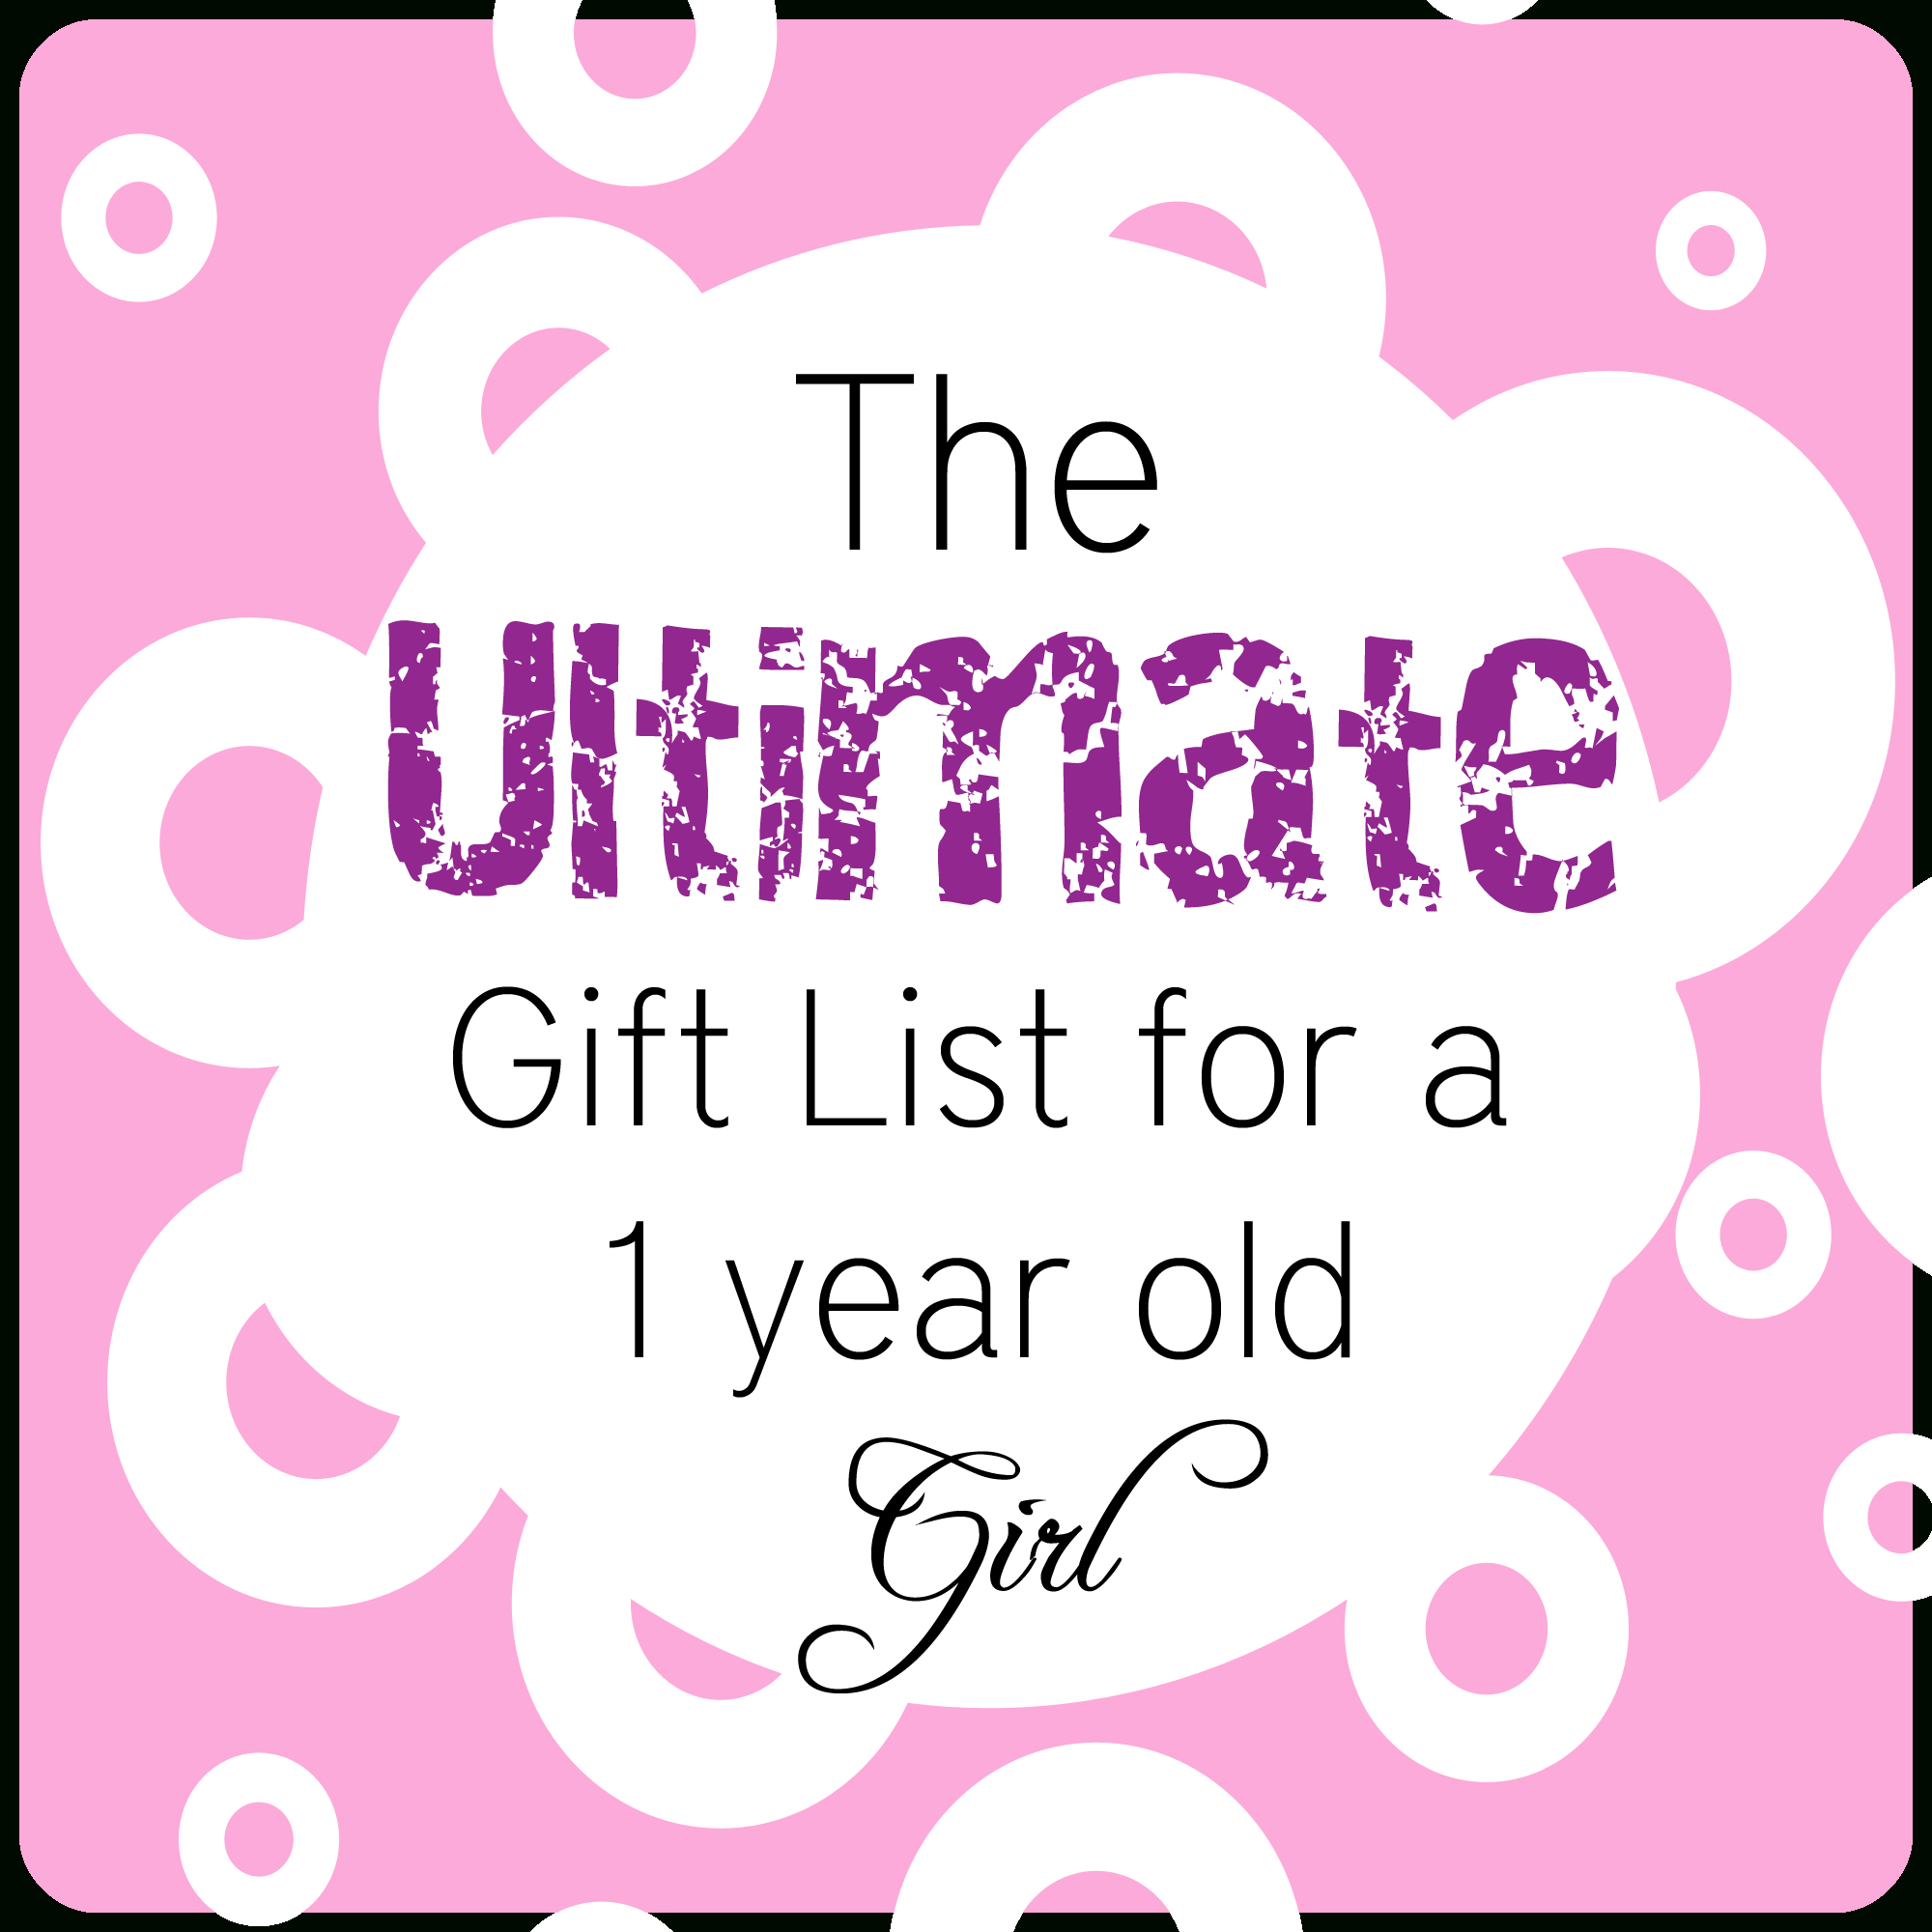 10 Lovable Gift Ideas For A 1 Year Old Girl best gifts for a 1 year old girl e280a2 the pinning mama 3 2022